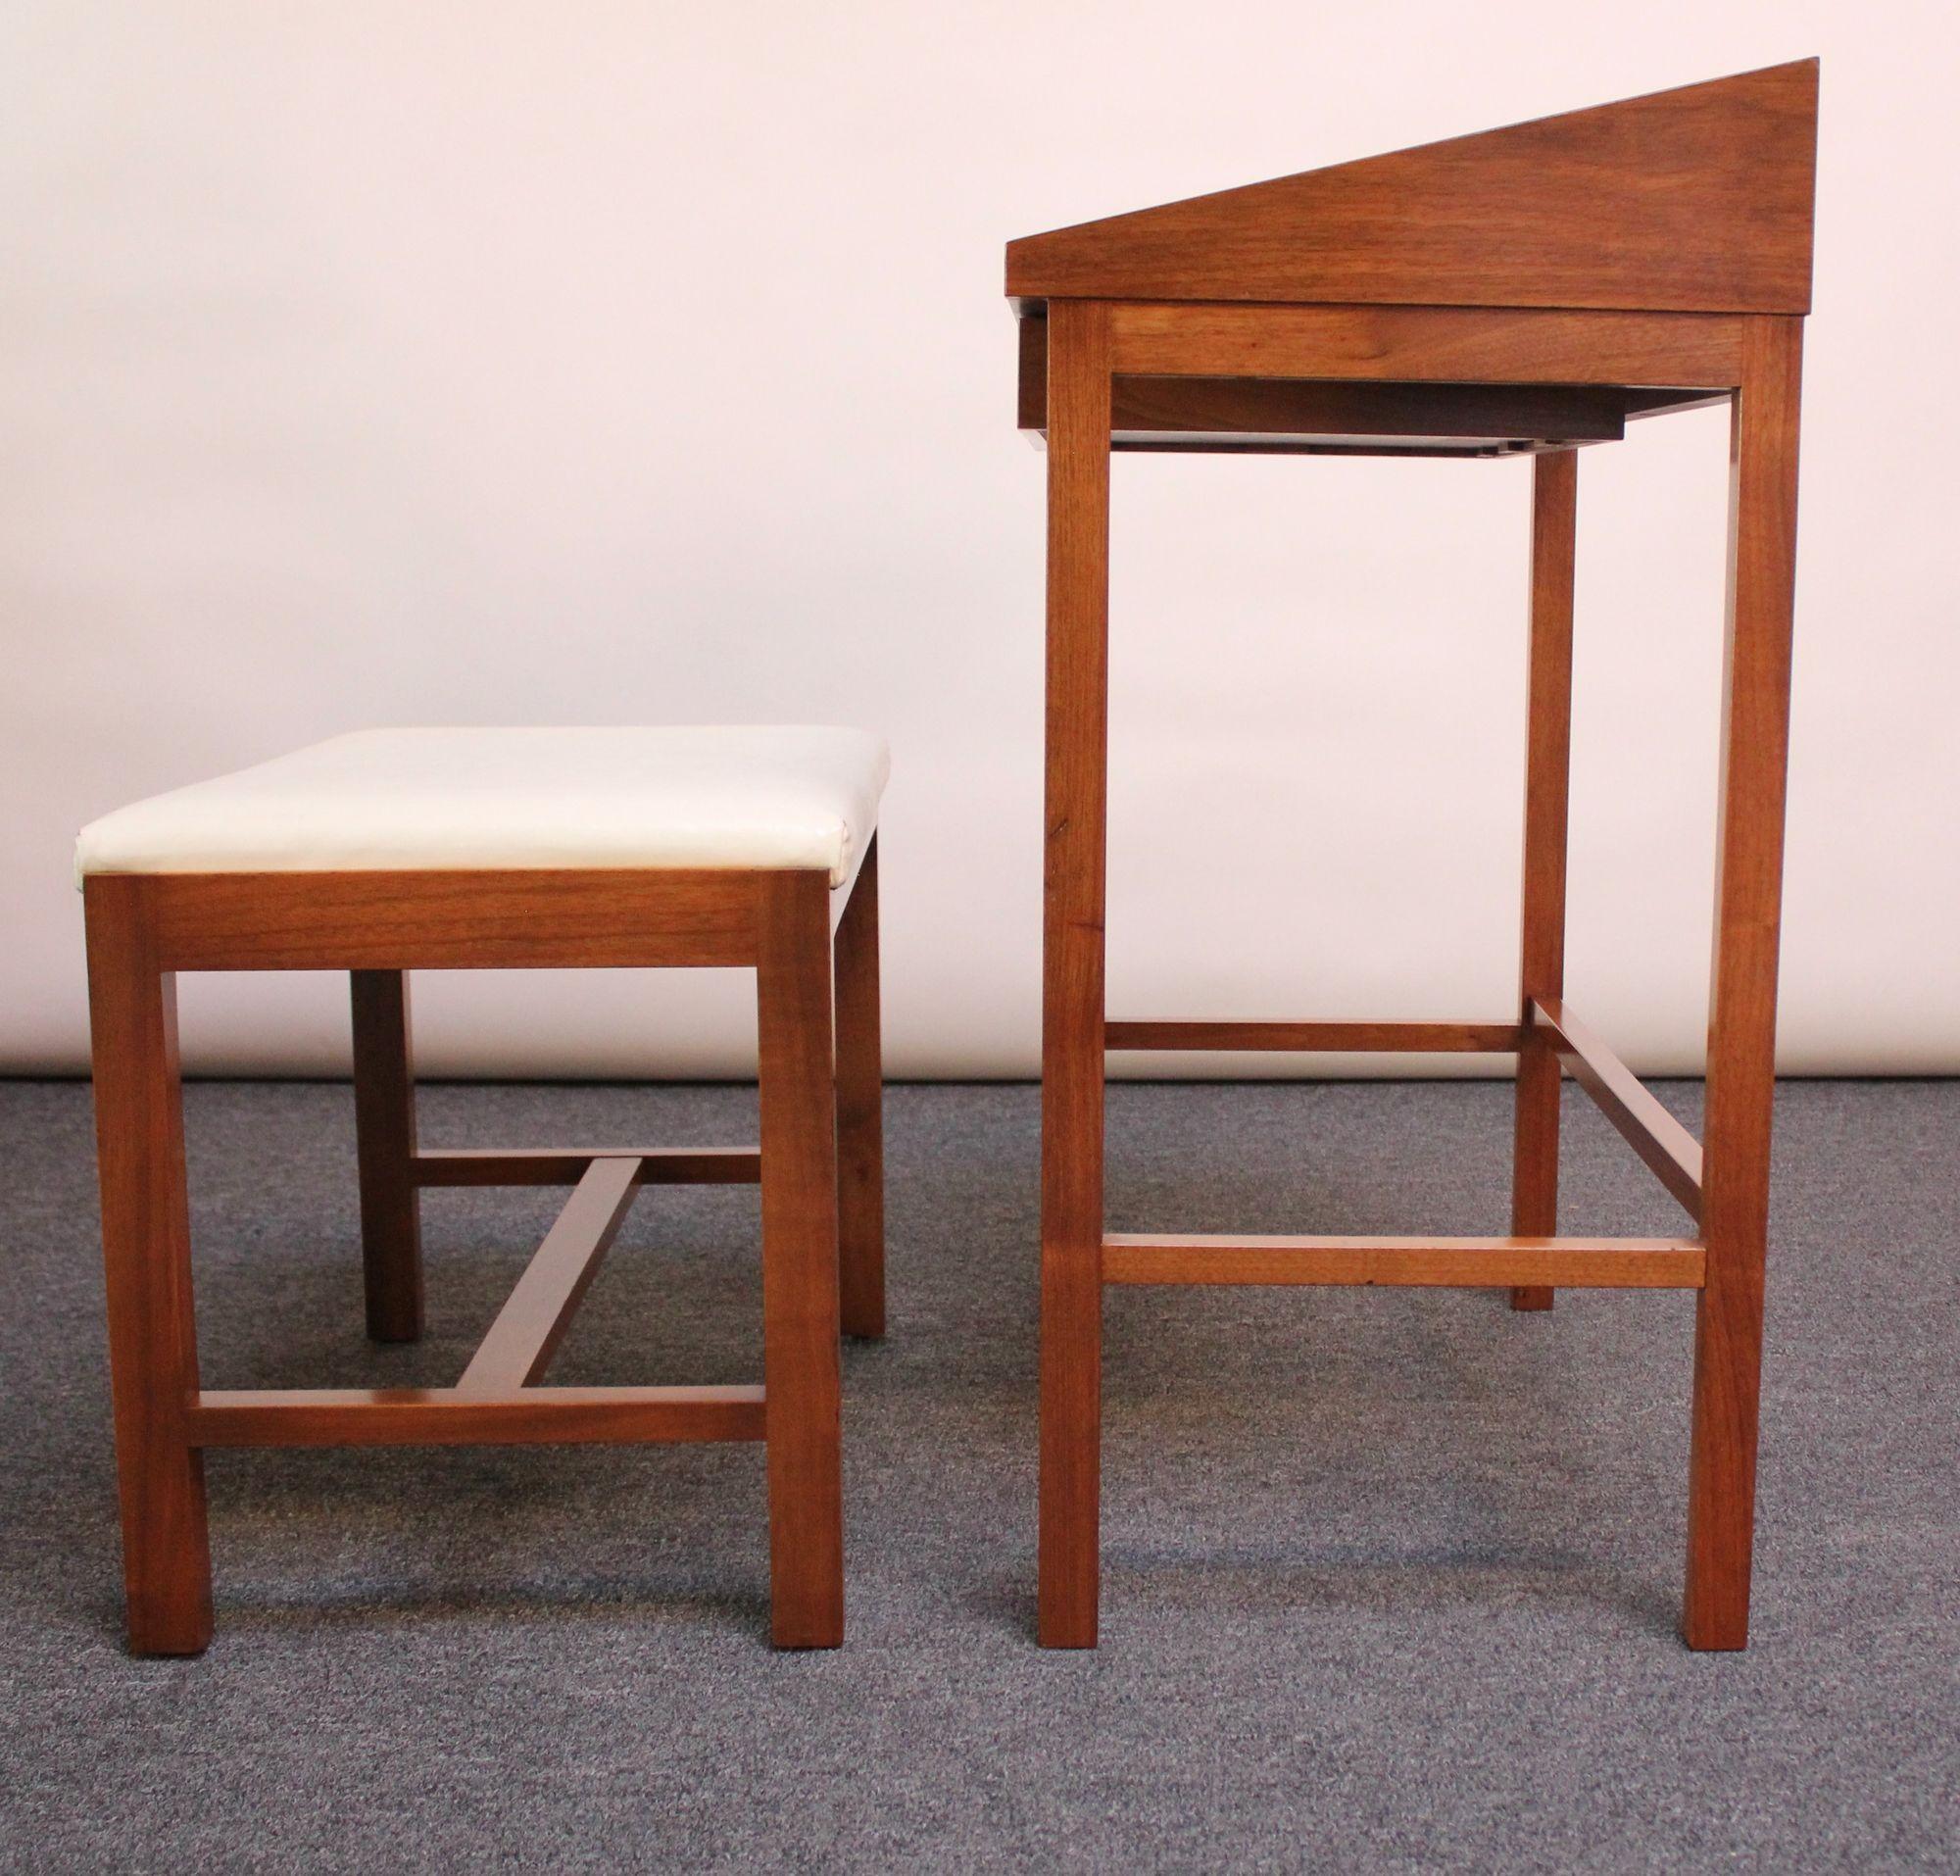 American Petite Vanity/Writing Table with Stool Designed by Edward Wormley for Dunbar For Sale